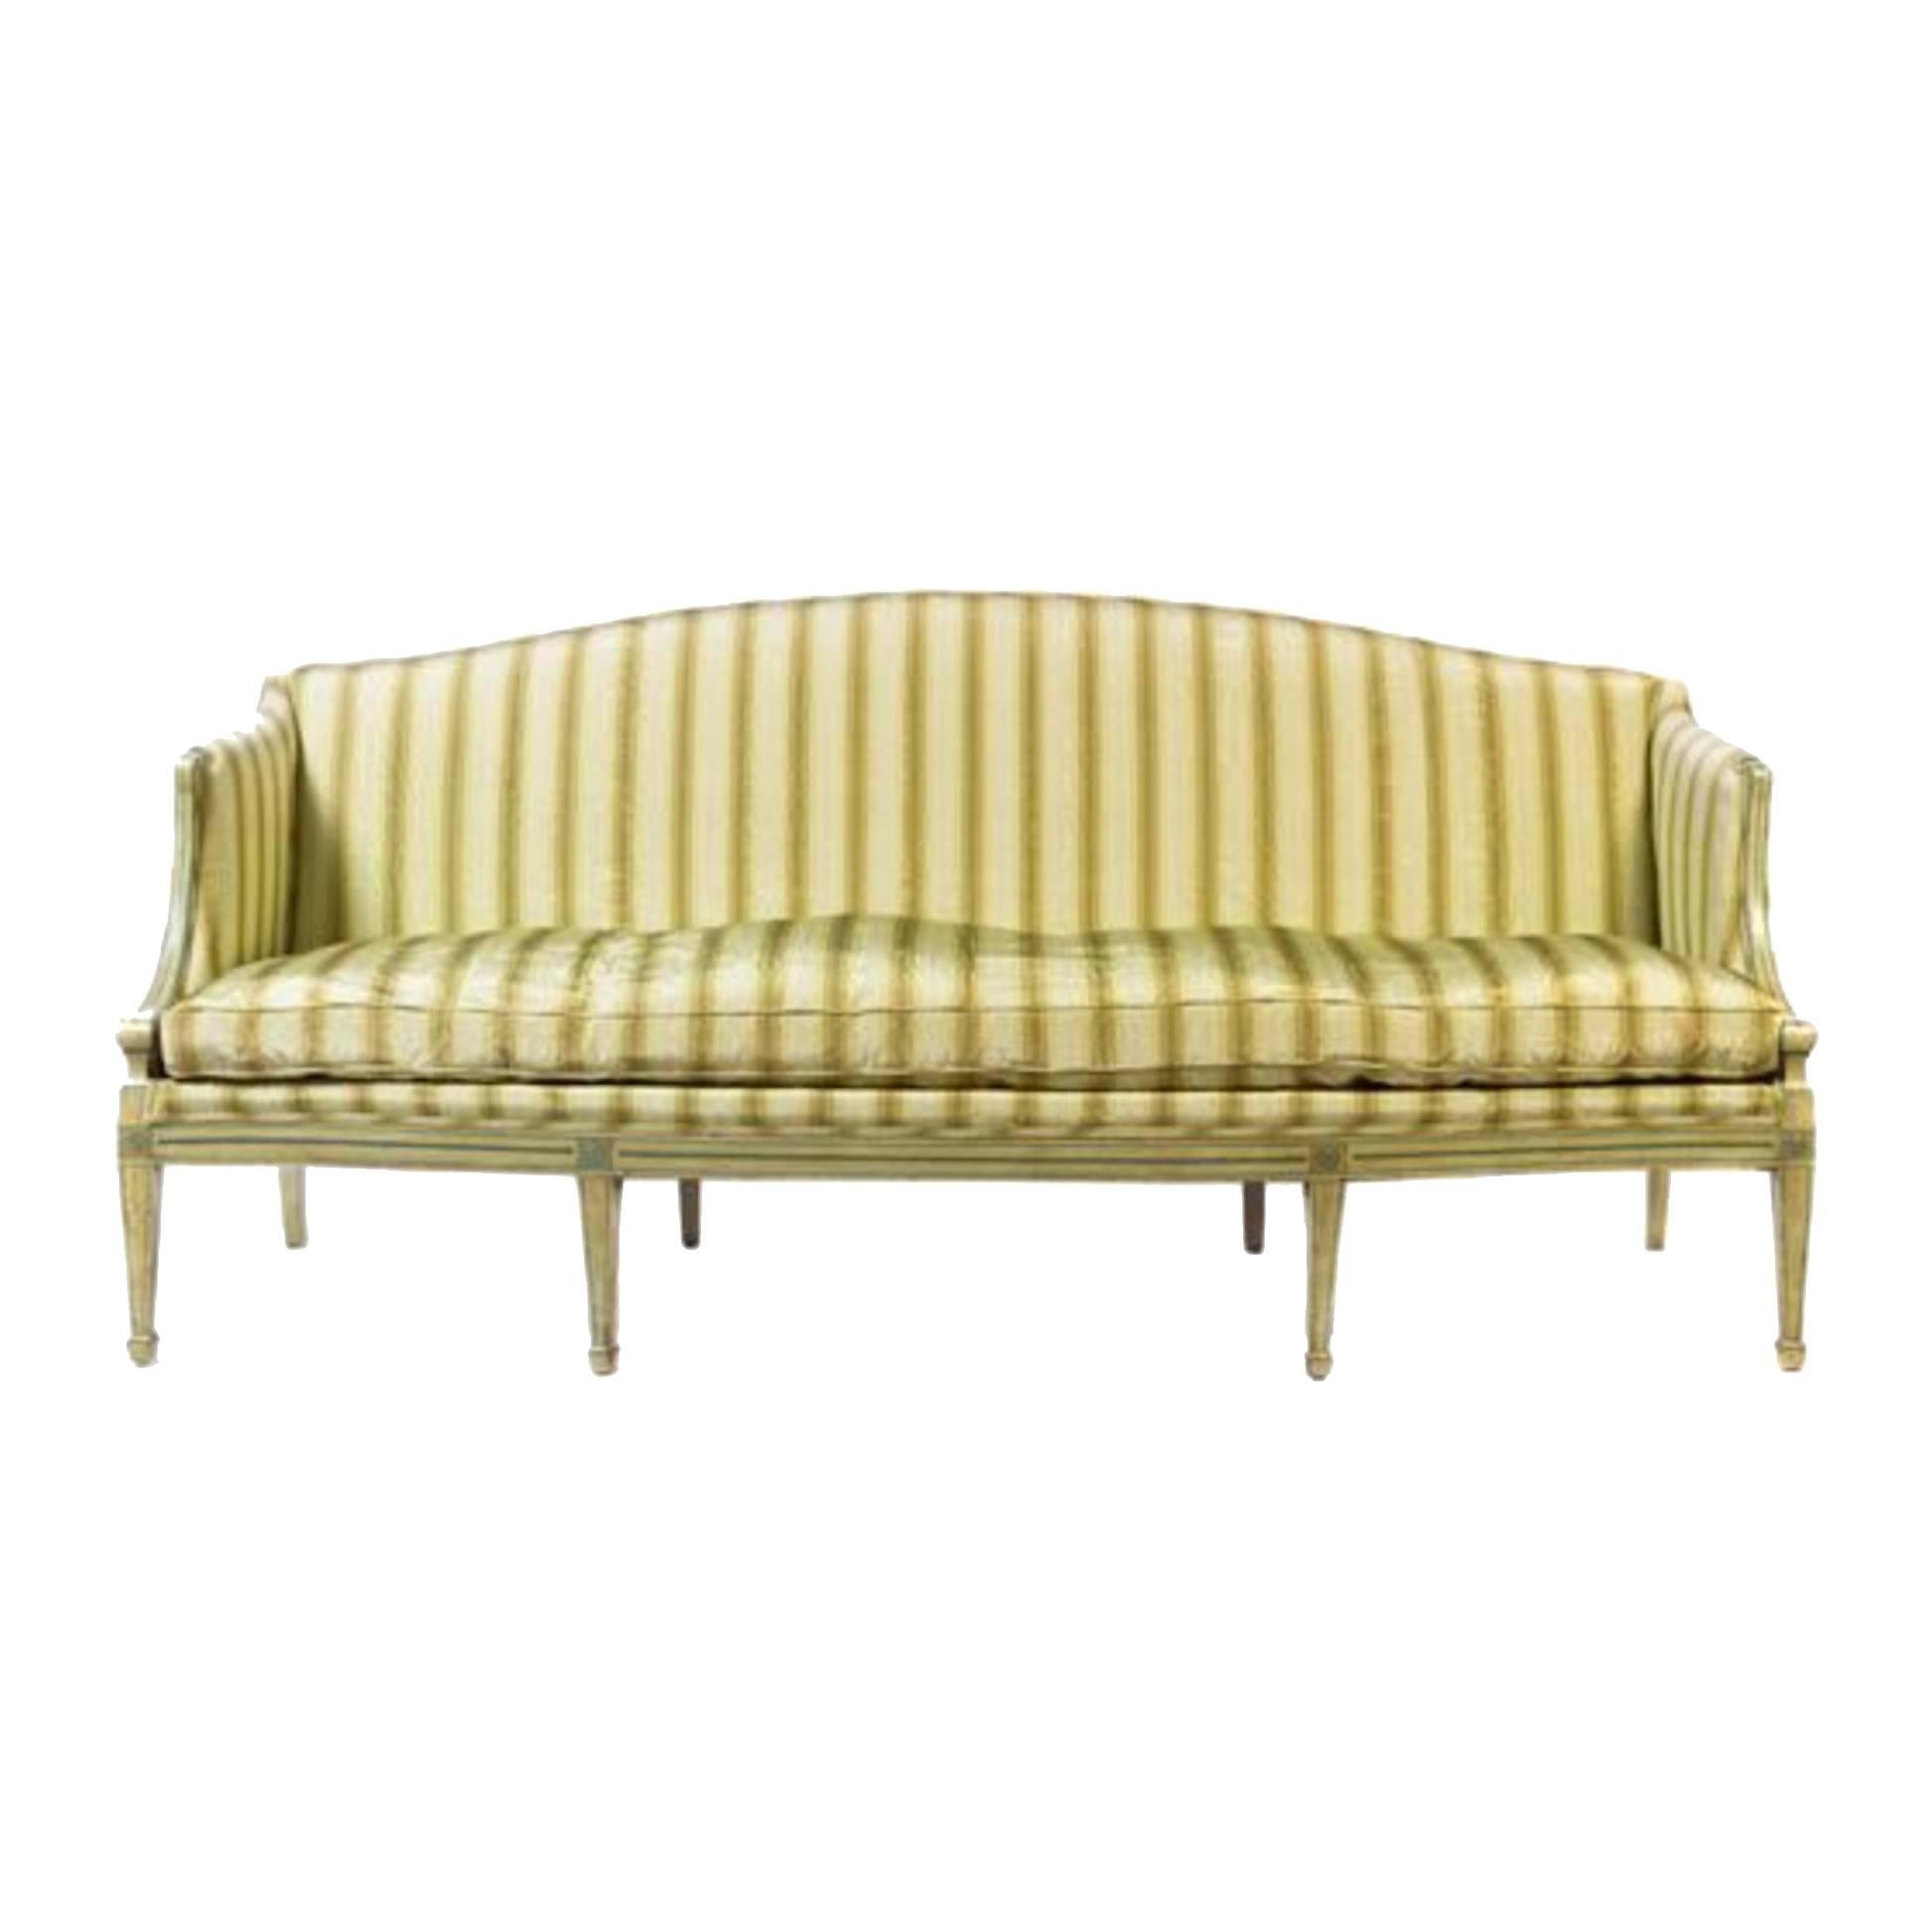 19th Century Italian Neoclassical Sofa with Painted Decoration